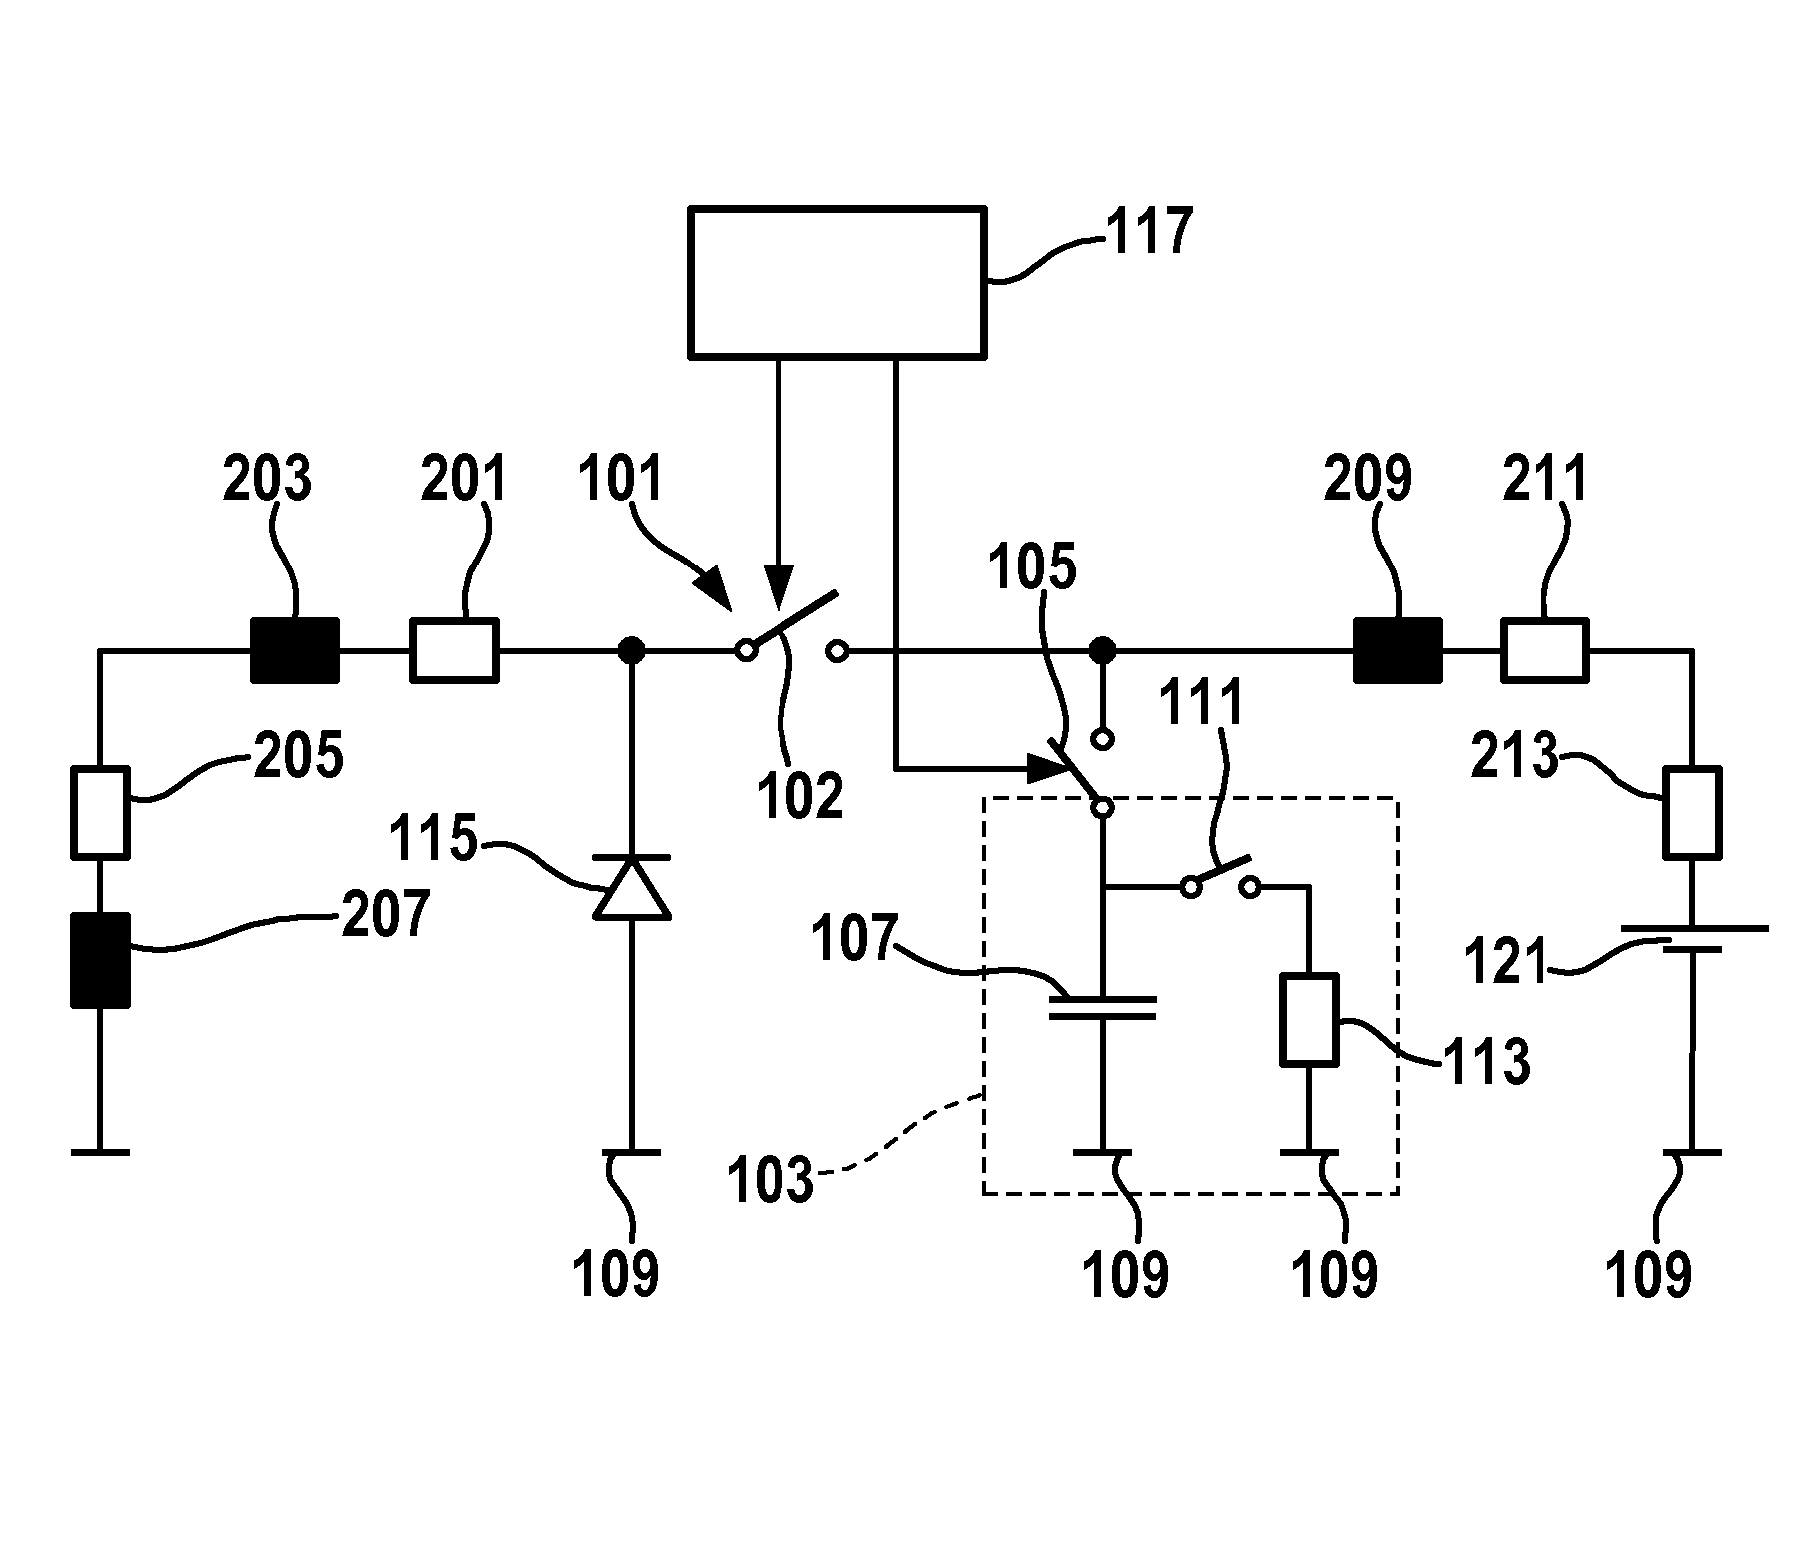 Apparatus for supplying electrical power to an electric motor